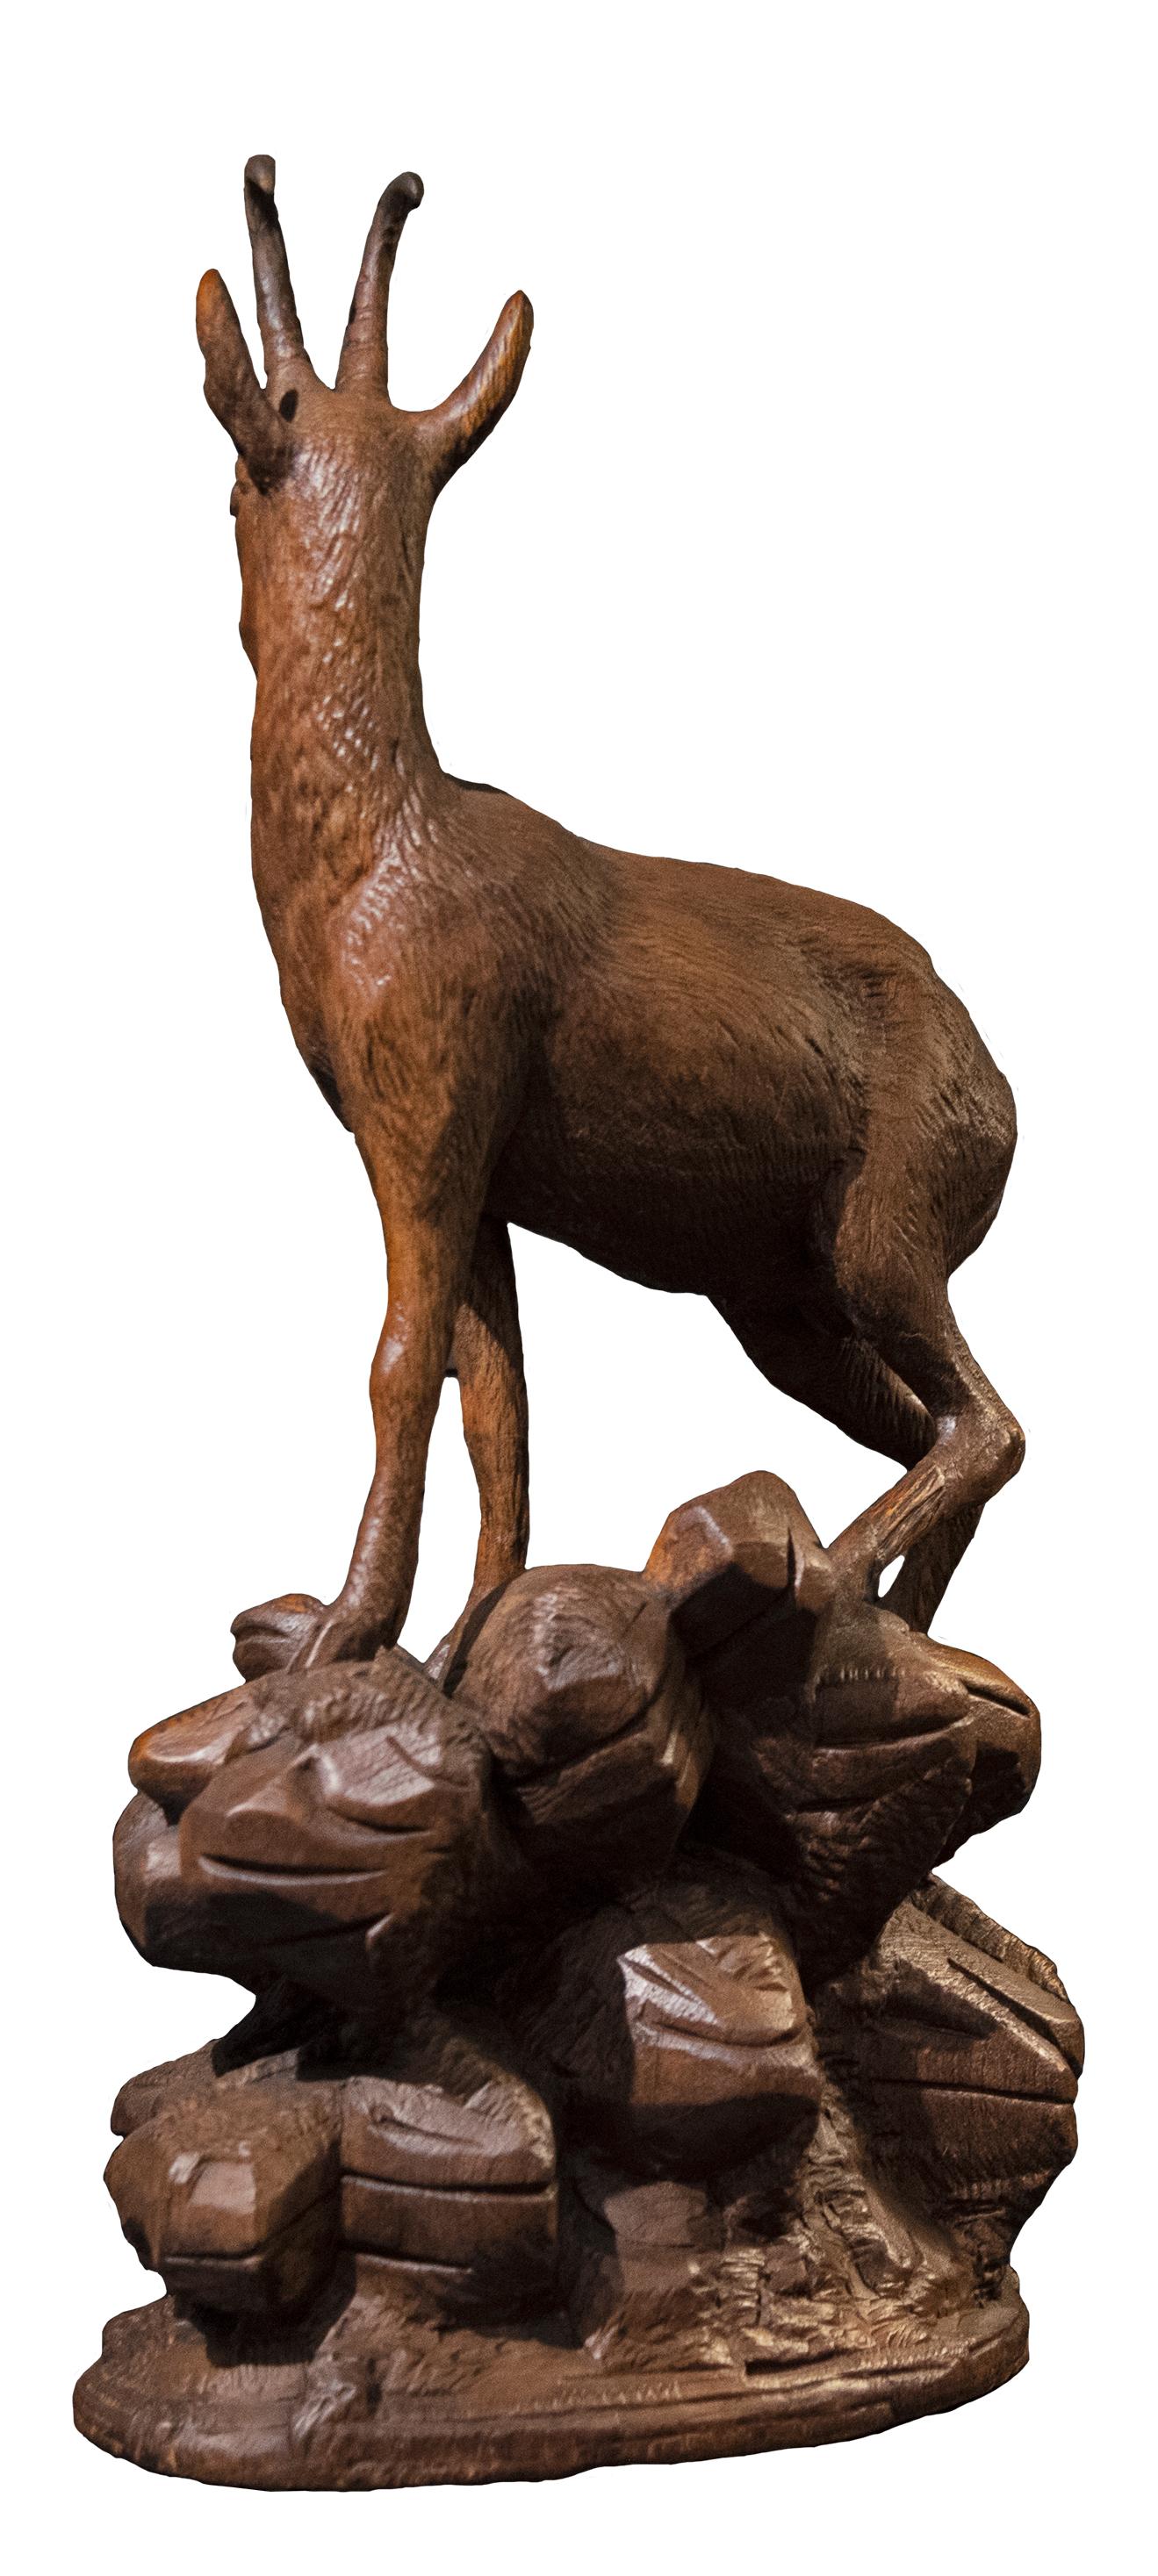 A nineteenth-century Swiss wood sculpture of a single ibex atop a rocky landscape.

Carved in the Black Forest style, popular in the late nineteenth century.